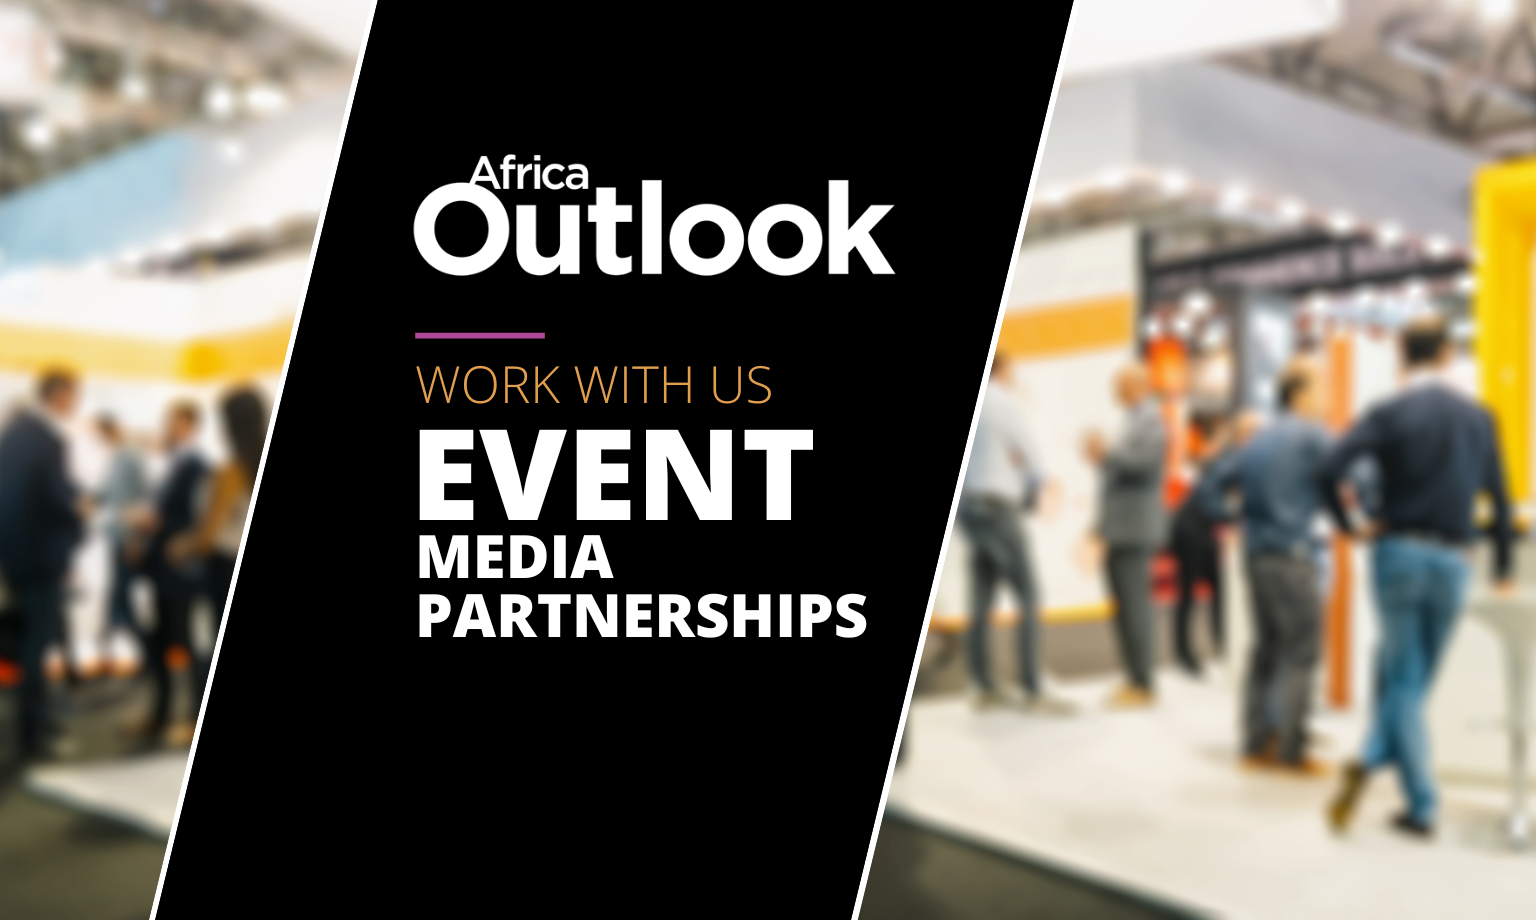 Why Partner with APAC Outlook APAC Outlook Magazine is a media partner with business events across the APAC region. The APAC Outlook team can bring the full force of our experience to marketing your Expo, Exhibition, or Conference to our readers across the APAC region. There is an opportunity for extra exposure if your event is a great fit for one of our global sector titles… Healthcare Outlook, Manufacturing Outlook, and Mining Outlook. Why We Want to Partner with You APAC Outlook Magazine has two primary purposes for entering into event media partnerships. First: Our readers are interested in attending, exhibiting, and/or sponsoring the events that we partner with. Second: They are a great source of features for future issues of our business magazine titles. A member of our Editorial Projects Team will work through the list of your exhibitors and/or speakers to identify and source great corporate success stories and potential leadership interviews for upcoming issues of APAC Outlook Magazine. Two Types of Event Media Partnerships Available While we are happy to consider a bespoke partnership, we have created two types of partnership that usually satisfy both parties. The type of event media partnership we can make available to you will depend on the level of endorsement and/or introduction our Editorial Projects Team is given to your Event Speakers and Exhibitors. #1 Full Magazine / Website and Social Media Partnership Full Magazine partnerships are typically reserved for large business events that include an Expo or Exhibition, where visitor registration is usually free and the introduction you give to exhibitors and speakers is exceptional. Your Event Receives: Two pages in APAC Outlook Magazine (Full Page Event Focus Feature + Full Page Advertisement) Its own Event Page, Event Listing, and Banner Advertisement on the Website. Inclusion in our Email Newsletter(s). Social Media Activity (Announcement, Posts & Reshares). Our Minimum Criteria: Our logo (with link) on your Media Partners Page. An introduction of our Editorial Projects Team to your list of exhibitors and/or speakers. #2 Website and Social Media Partnership Website and Social Media partnerships are ideal for smaller events such as conferences and forums, where there may be a cost for delegate registration, and where no introduction or endorsement is made on behalf of our Editorial Projects Team. Your Event Receives: Its own Event Page, Event Listing, and Banner Advertisement on the Website. Inclusion in our Email Newsletter(s). Social Media Activity (Announcement, Posts & Reshares). Our Minimum Criteria: Our logo (with link) on your Media Partners Page. Download our Asset Guidelines Specifications of artwork, text, image, and banner assets that we require. DOWNLOAD ASSET GUIDELINES Bespoke Event Media Partnerships are an Option If neither of our proposed partnership types shown above is suitable, or if you have something else in mind, please contact us to discuss your ideas. Contact Us / Enquire Send an email with details of your event to Event Media Partnership Lead, Fox Tucker via fox.tucker[at]outlookpublishing.com